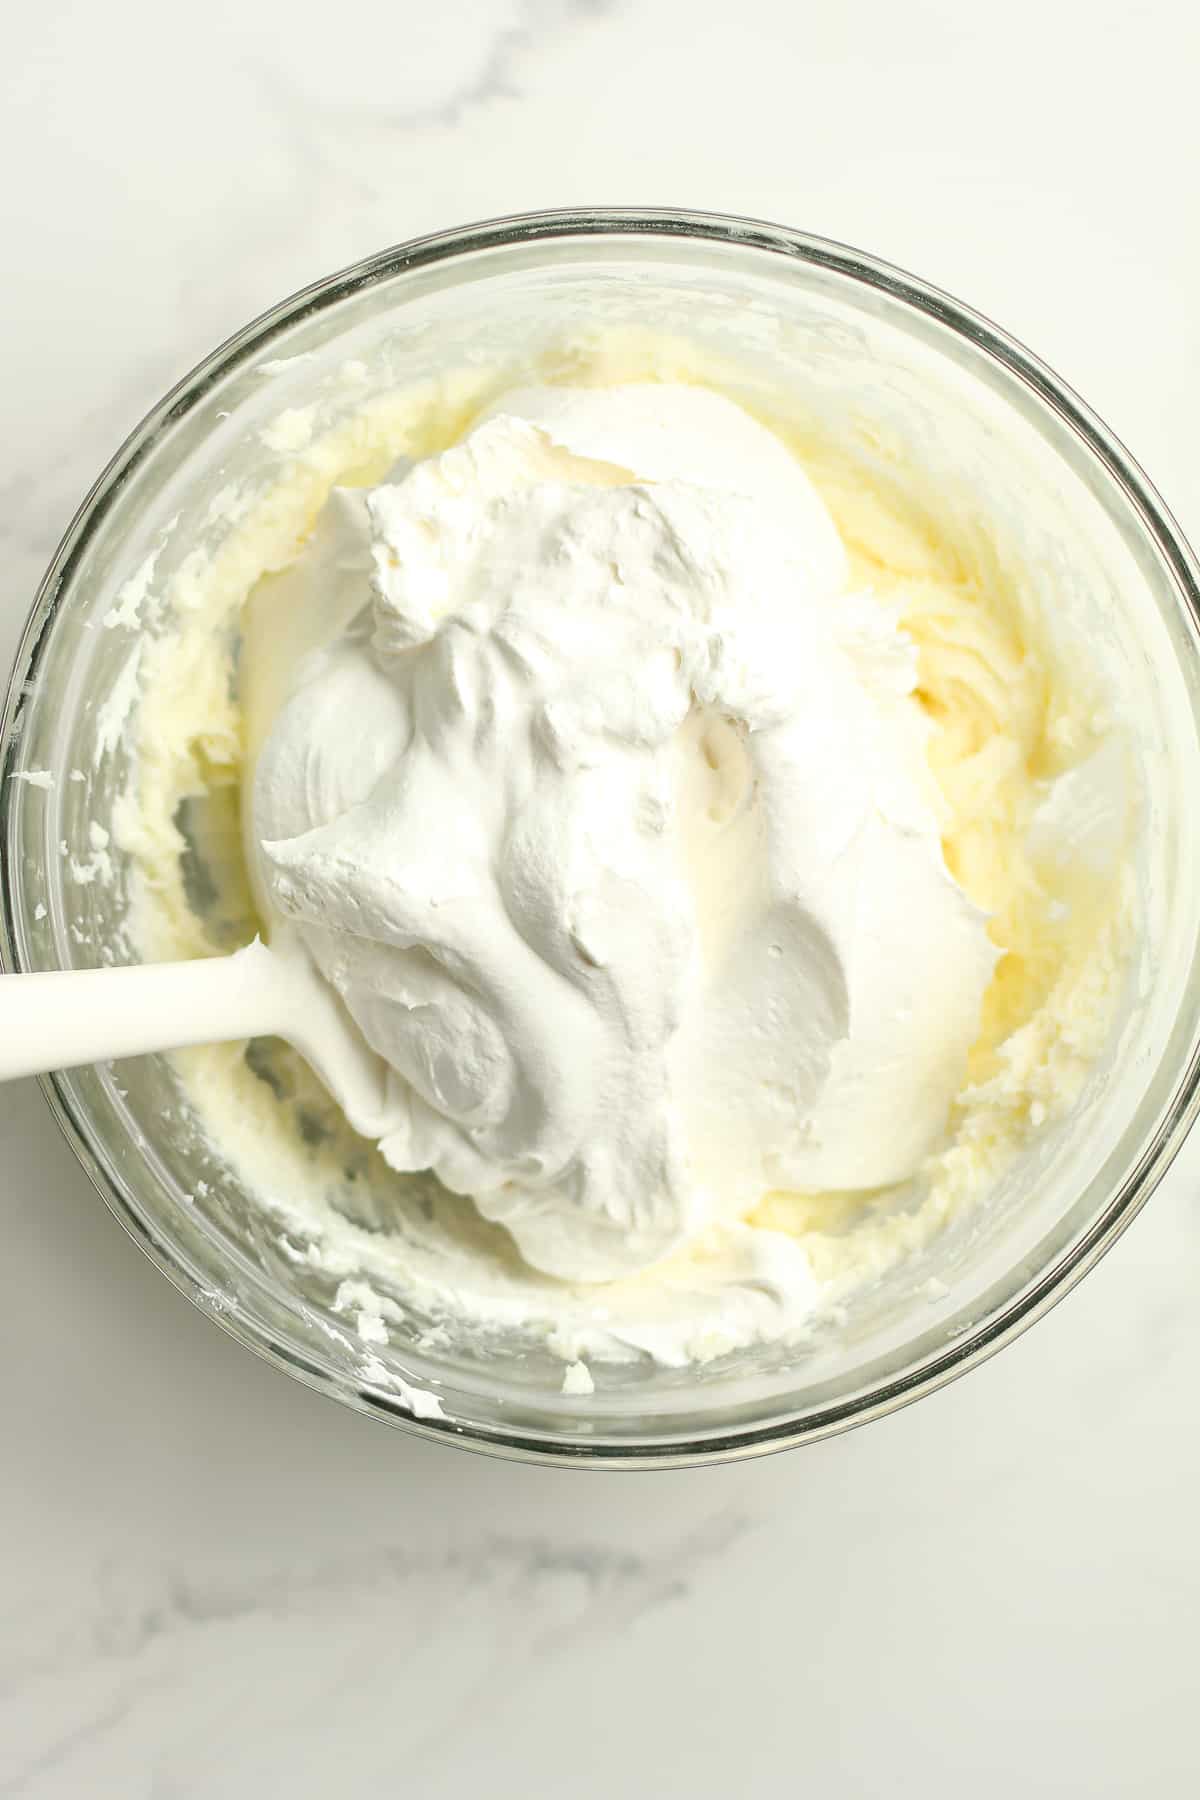 A bowl of the cream cheese mixture with the Cool Whip on top.